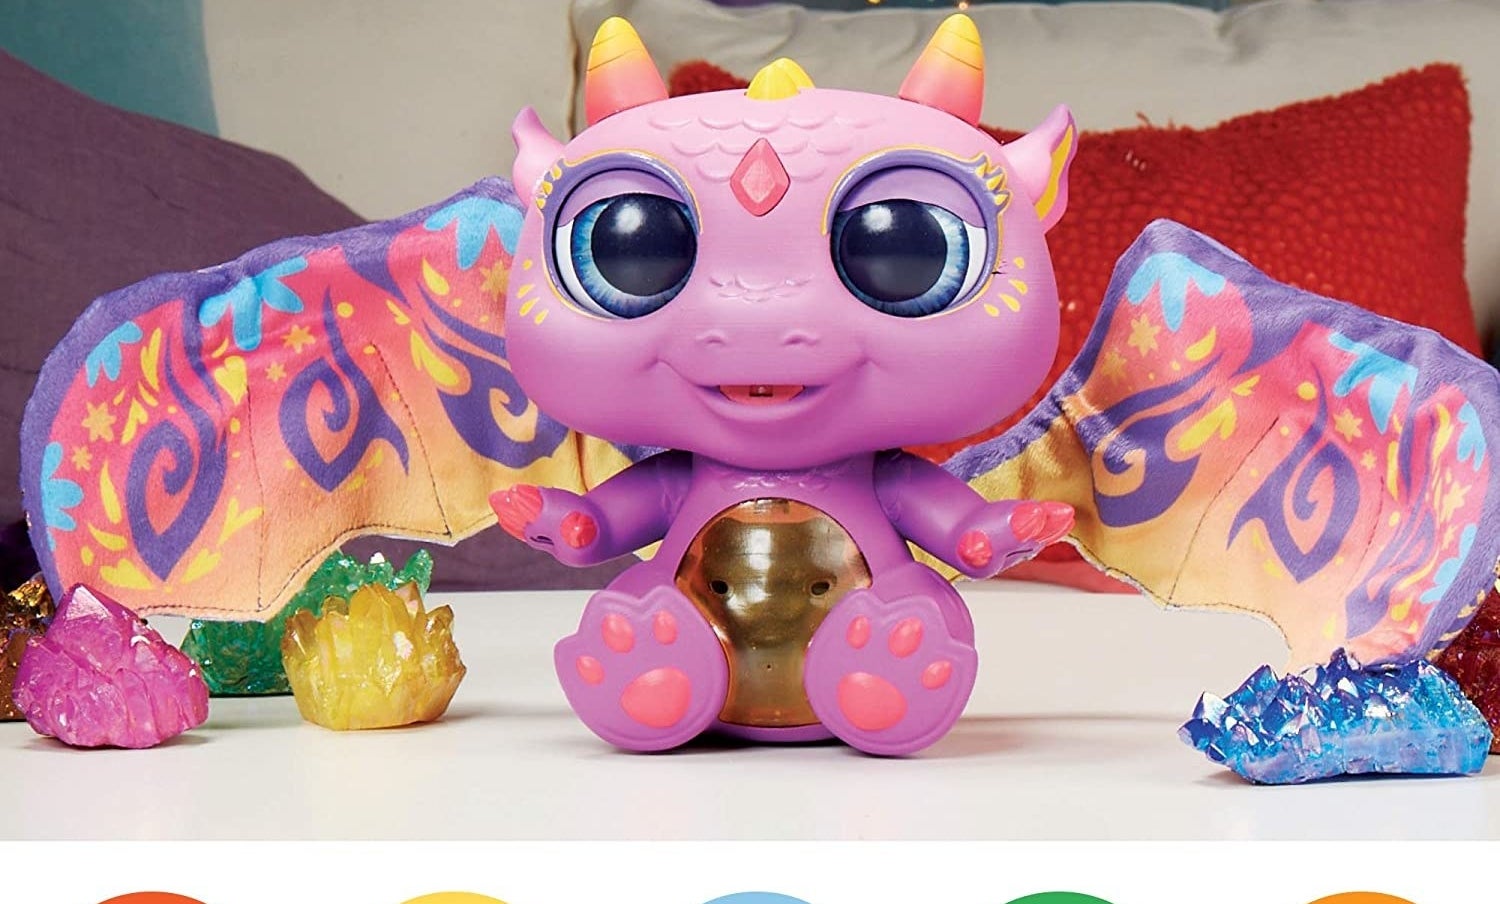 Purple toy dragon with wings extended and fire crystals 